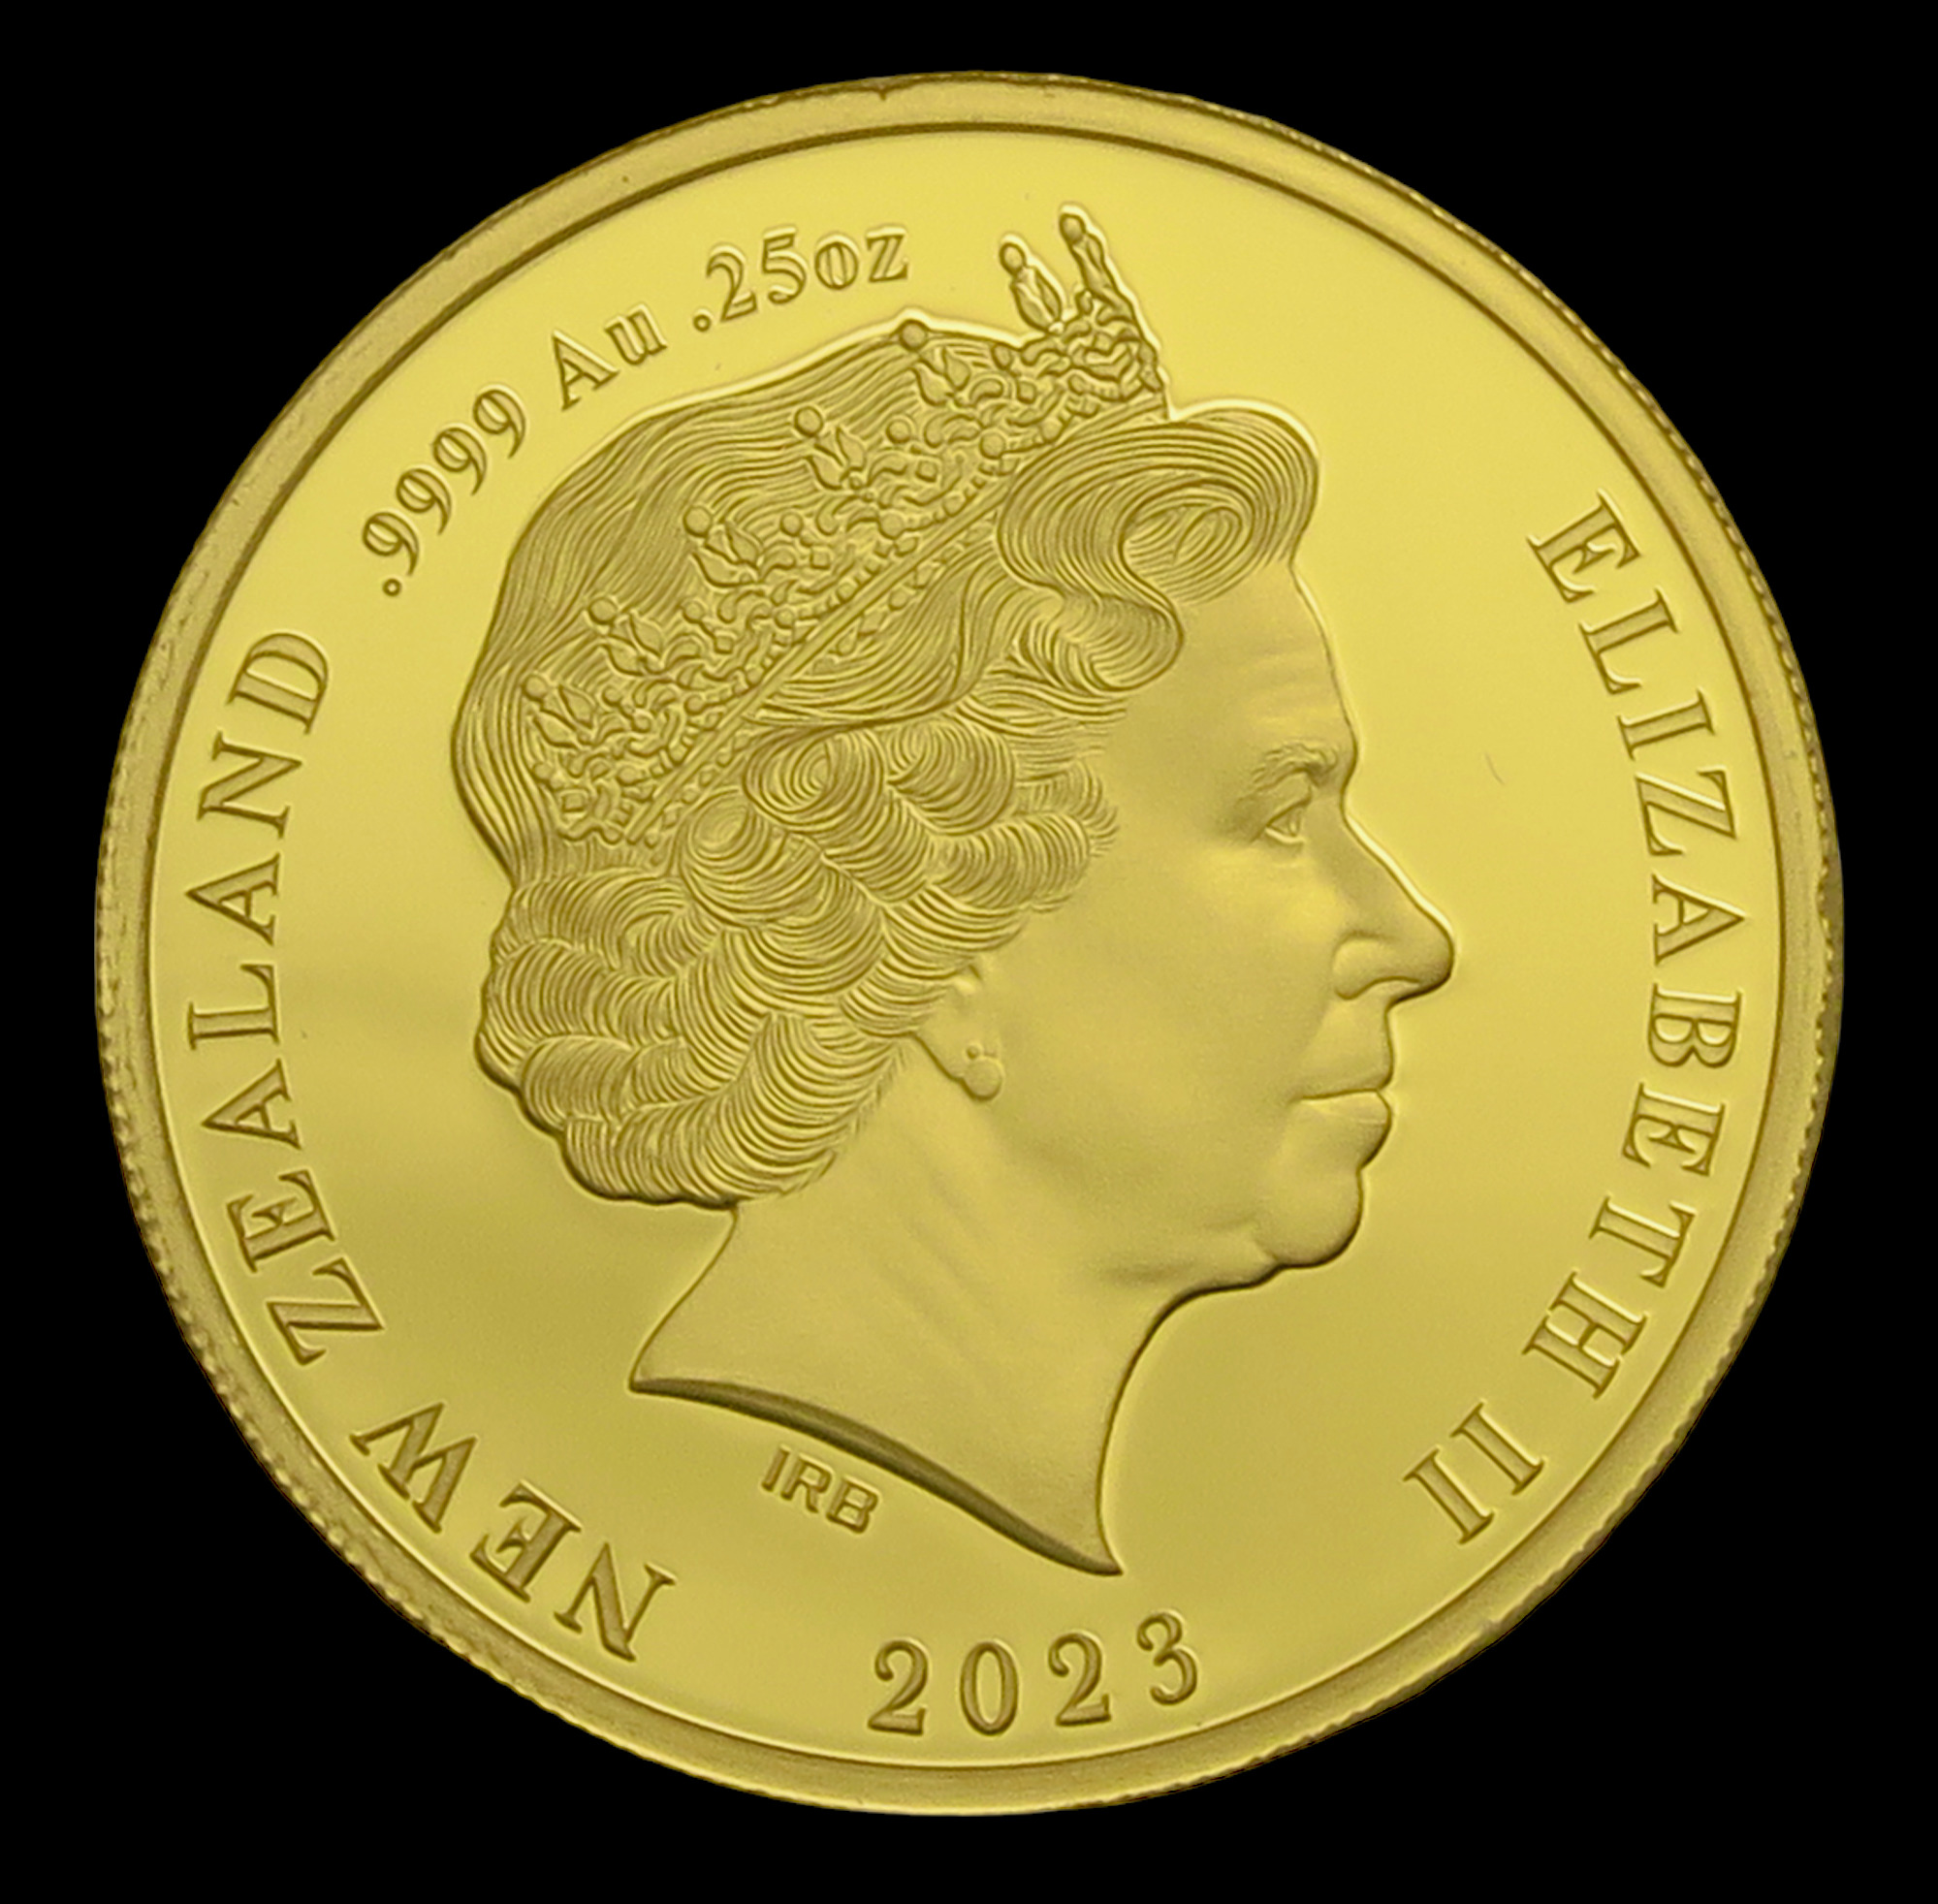 Gold proof kiwi coin 2023